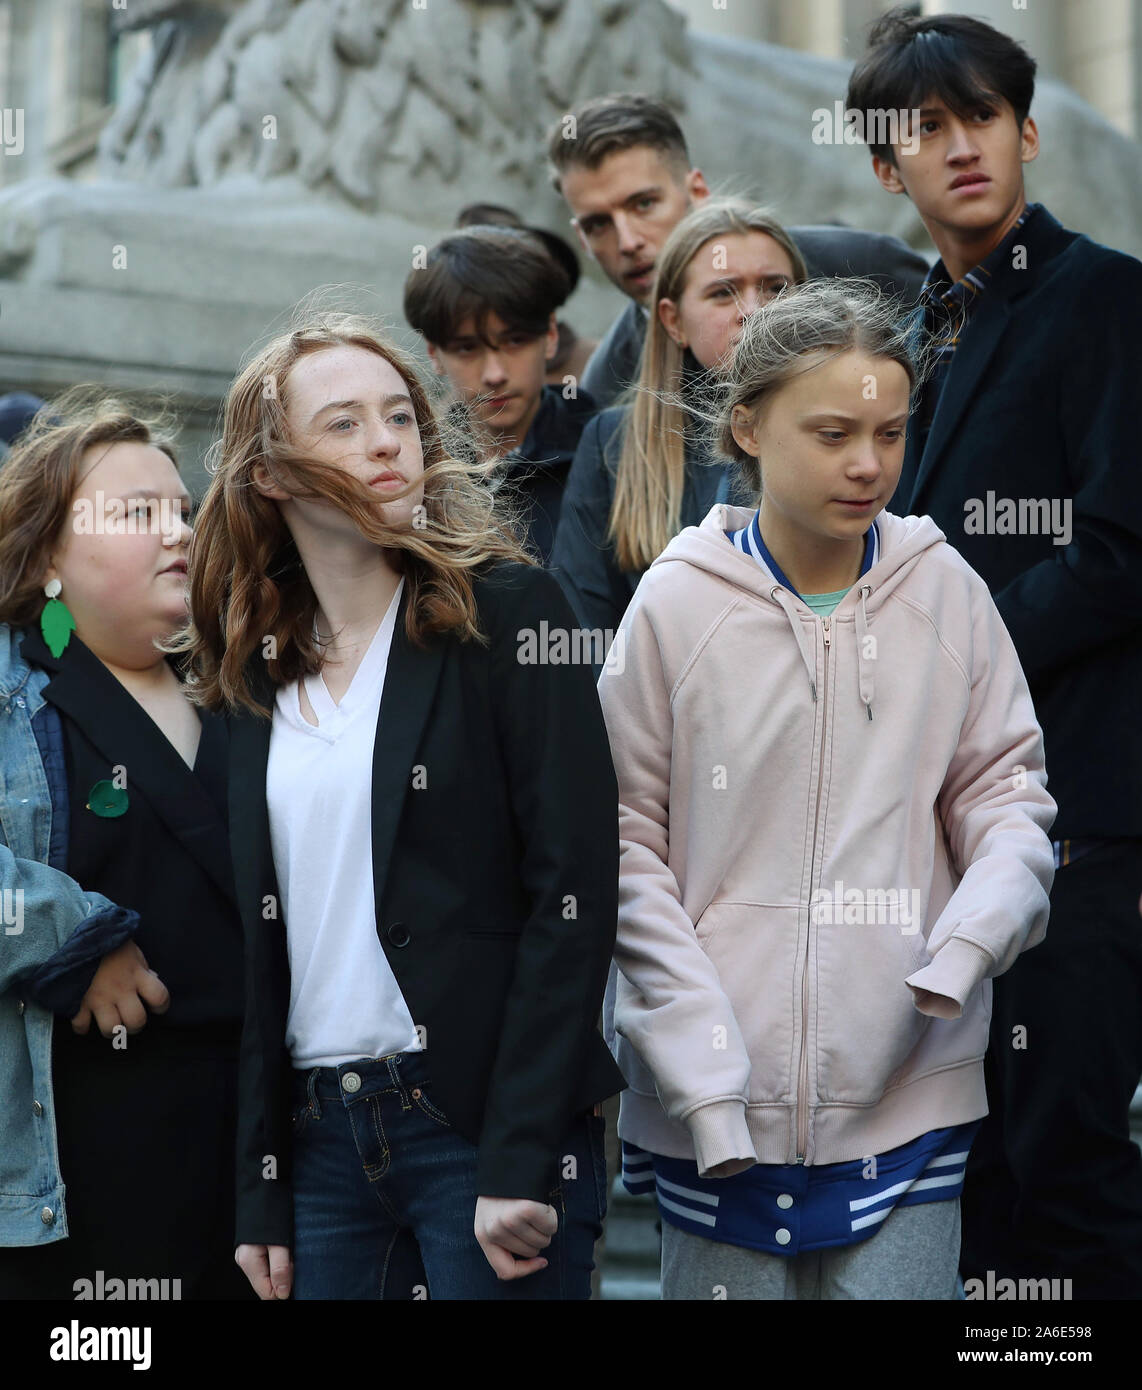 Vancouver, Canada. 25th Oct, 2019. Swedish teen activist Greta Thunberg arrives for the post federal election Friday climate strike march starting and ending at the Vancouver Art Gallery in Vancouver, British Columbia on Friday, October 25, 2019. Organized by local youth-led, Sustainabiliteens, Greta and a turn out of nearly 10,000 climate activists demand action from industry and the various levels of government and are supporting the 15-youth who announced their plans to sue the federal government alleging it has contributed to climate change. Credit: UPI/Alamy Live News Stock Photo